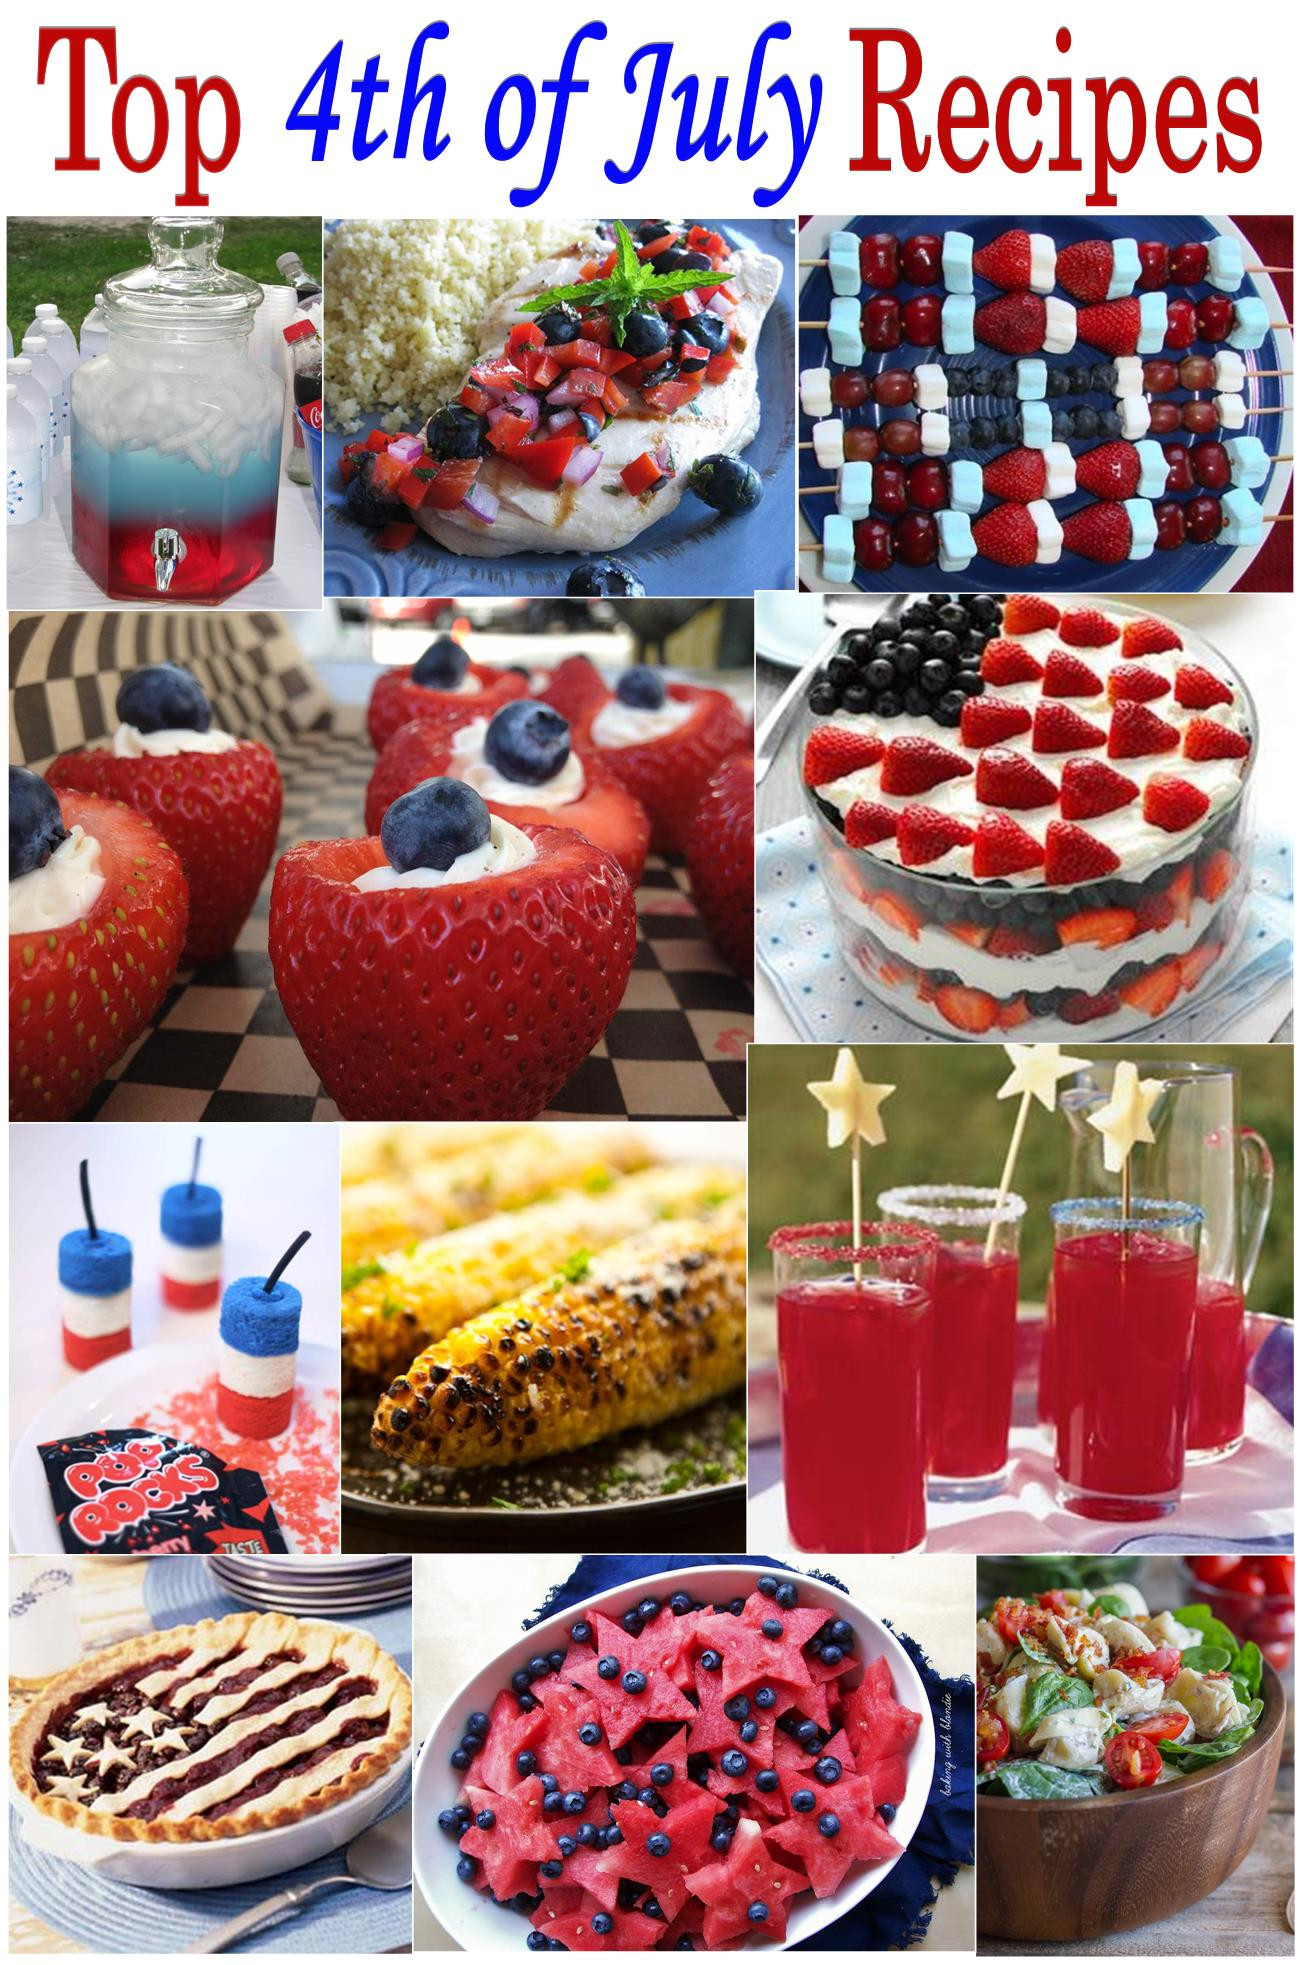 4th Of July Food
 Top 4th of July Recipes